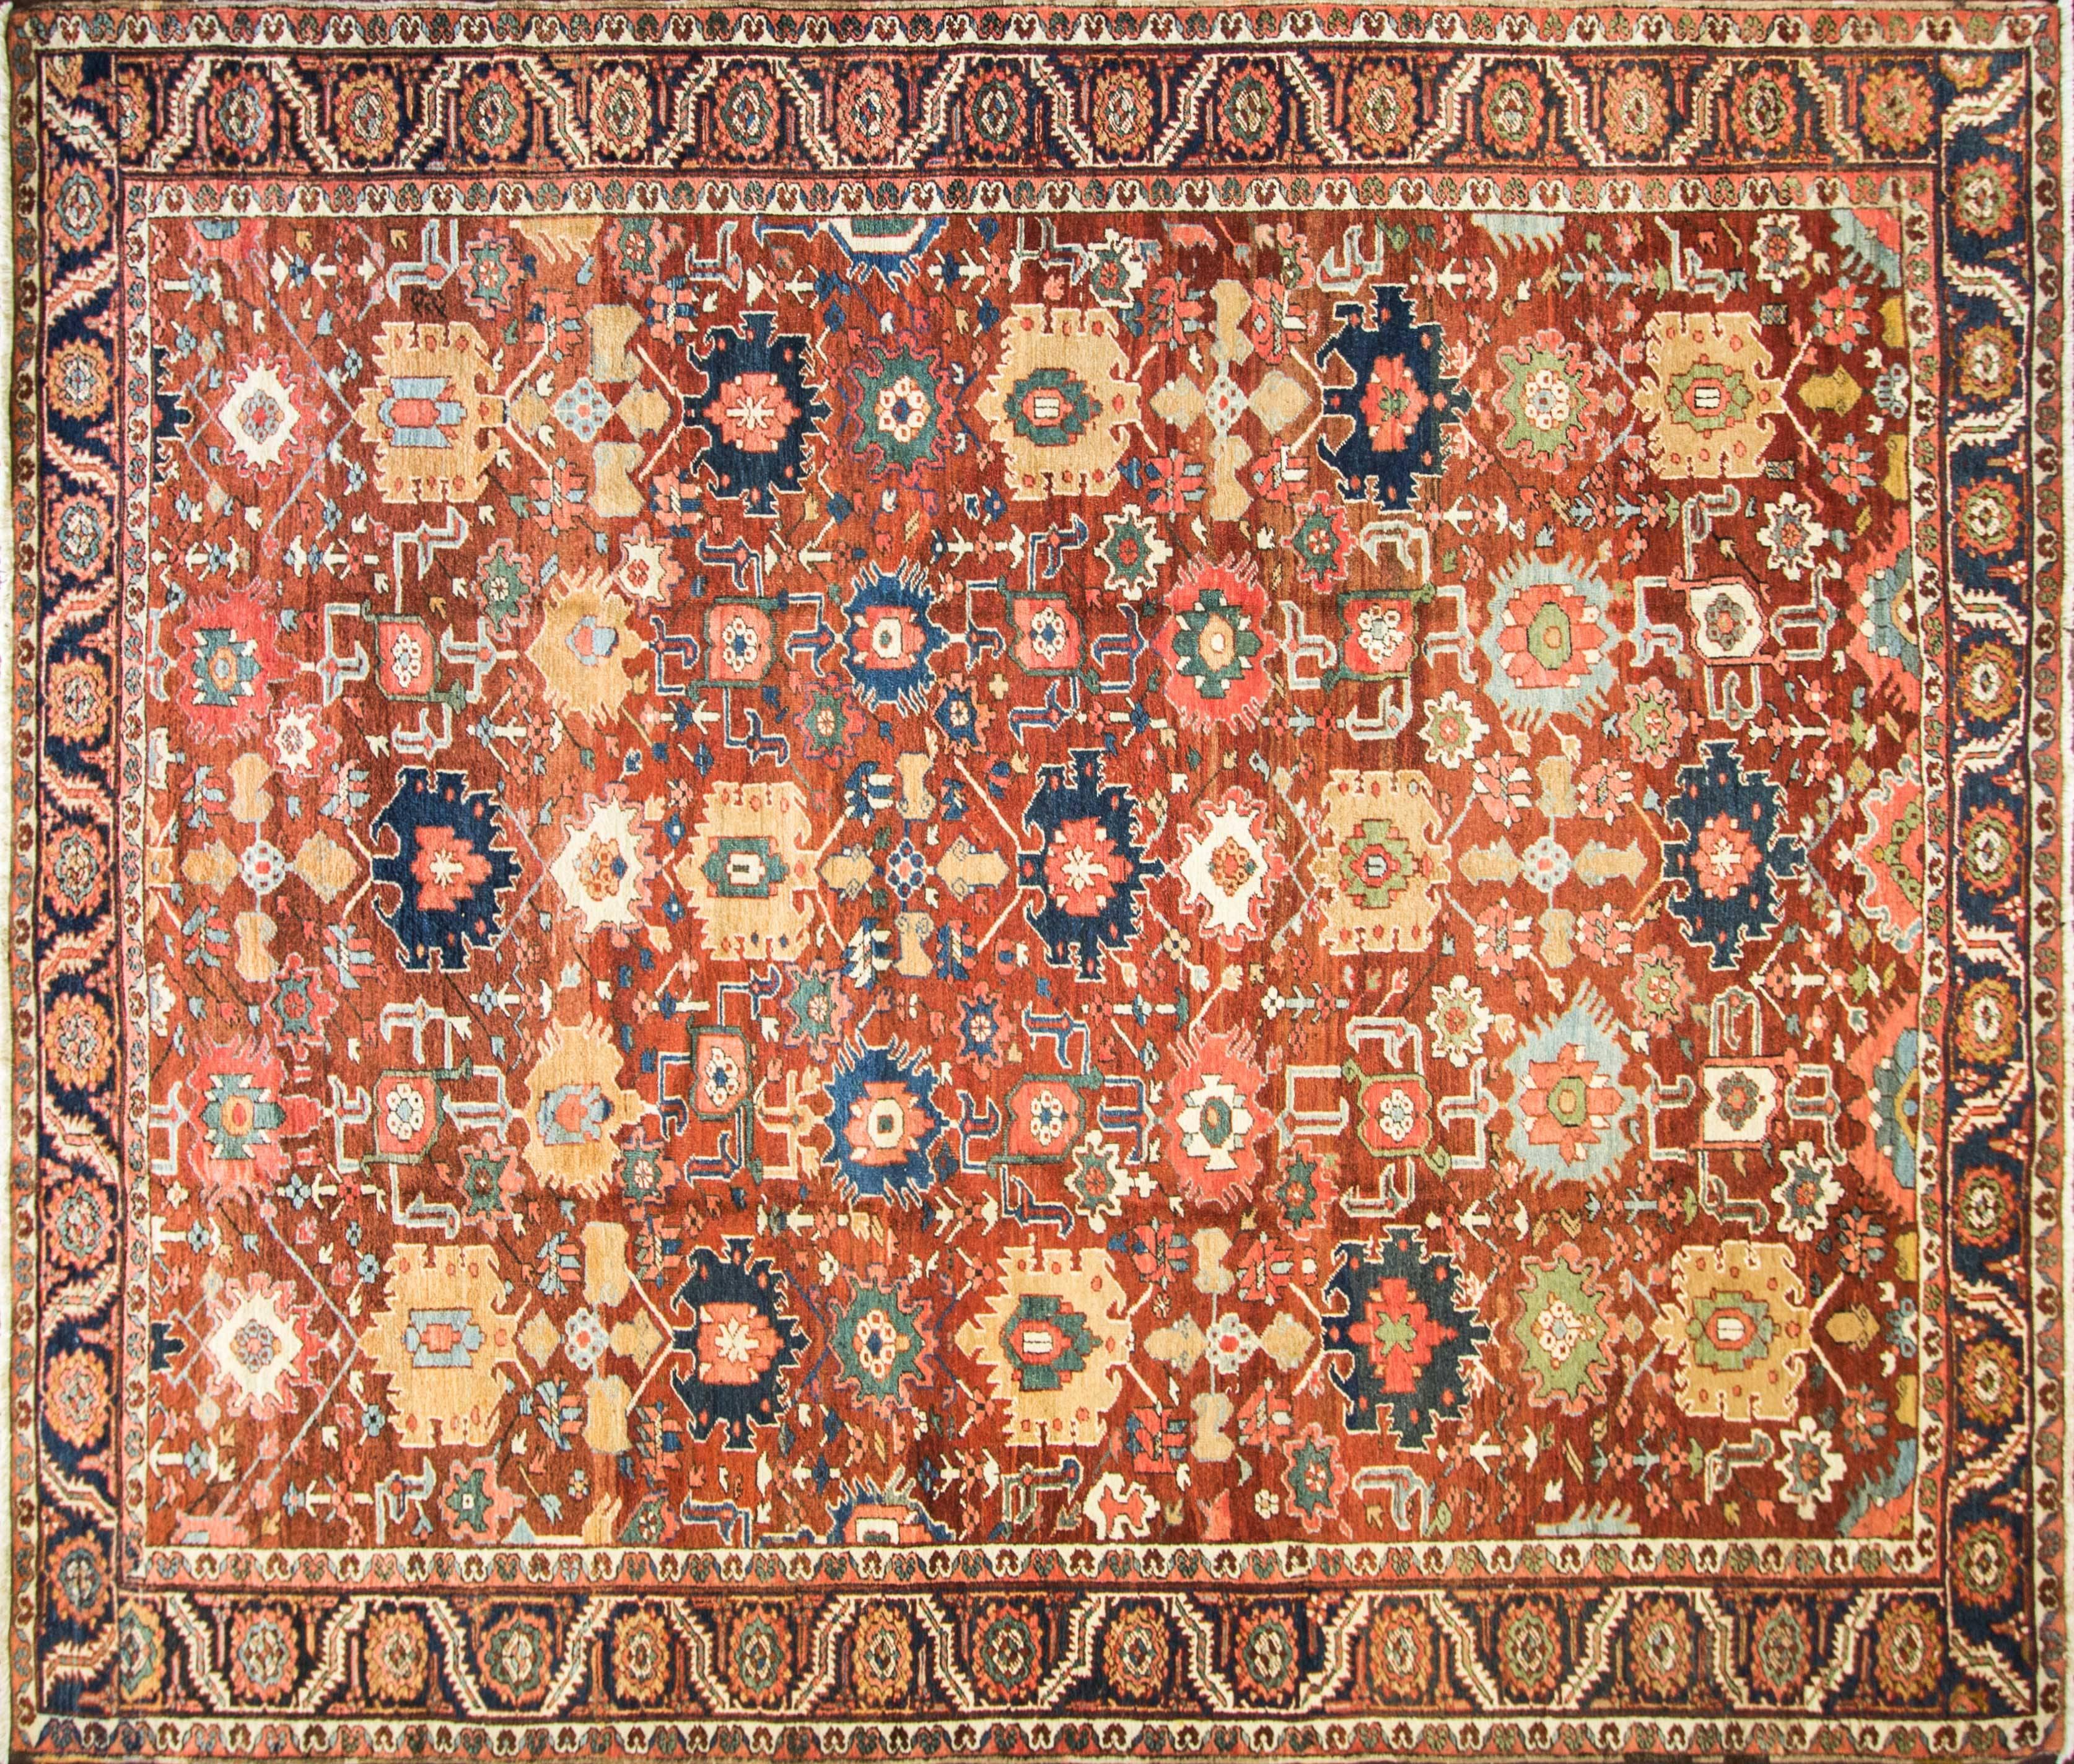 Unusual Serapi carpet with all-over design and large motives very decorative. Measures: 10.6” x 12”.
Woven in the rugged mountains of Northwest Persia, Serapi rugs are a distinct Heriz region style, with finer knotting and more large-scale